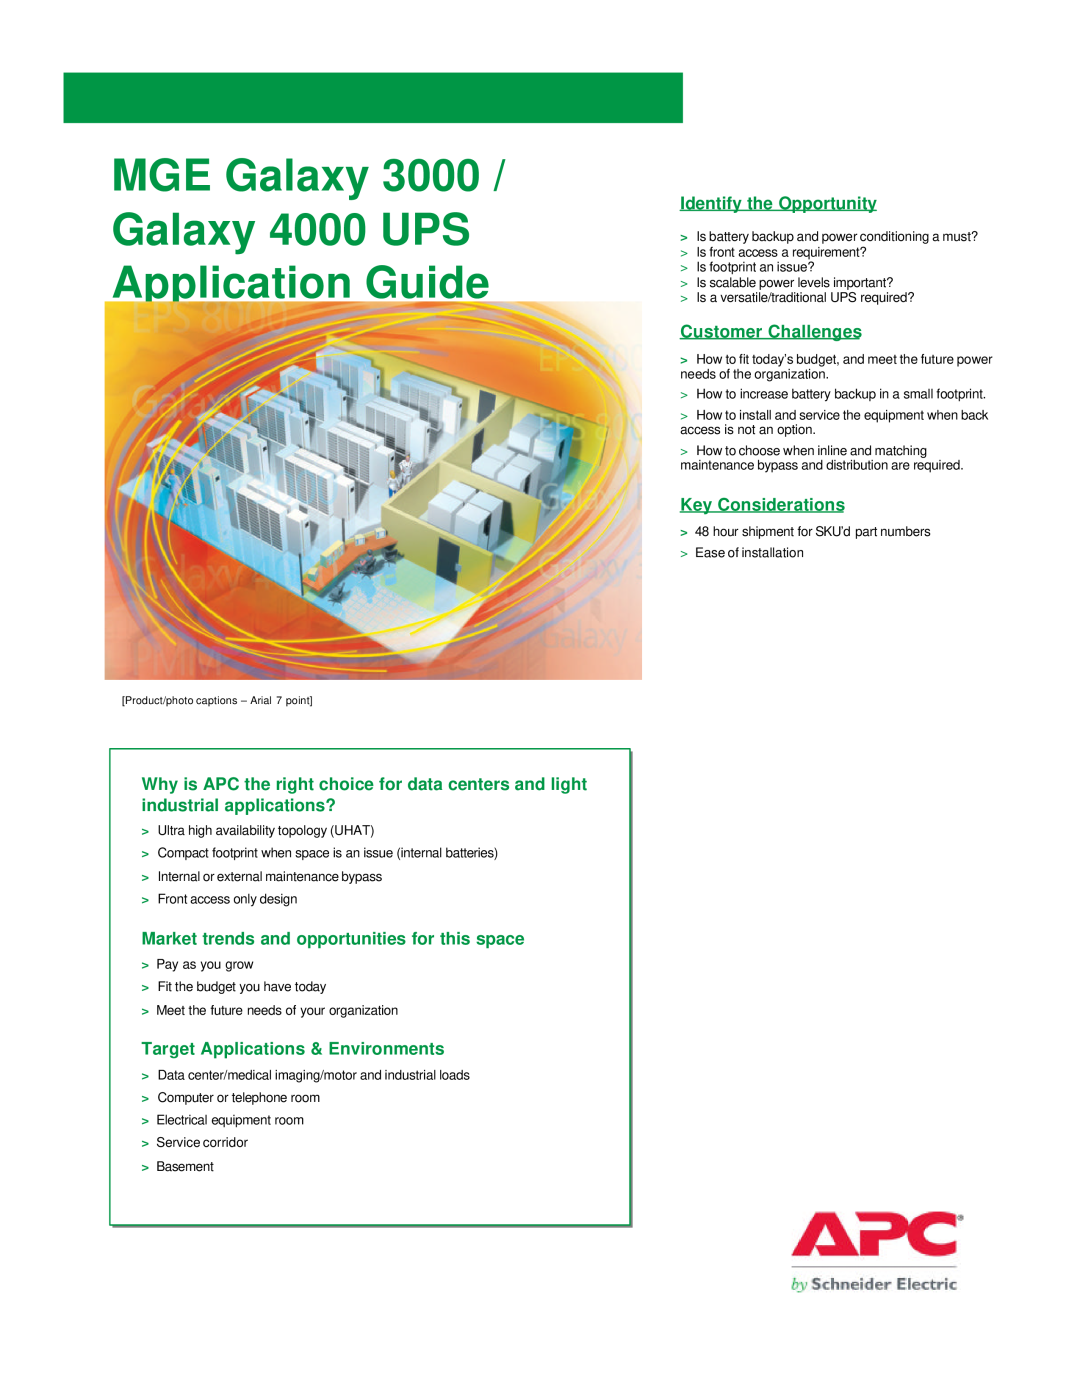 APC manual MGE Galaxy Galaxy 4000 UPS Application Guide, Place application image in this space, Customer Challenges 